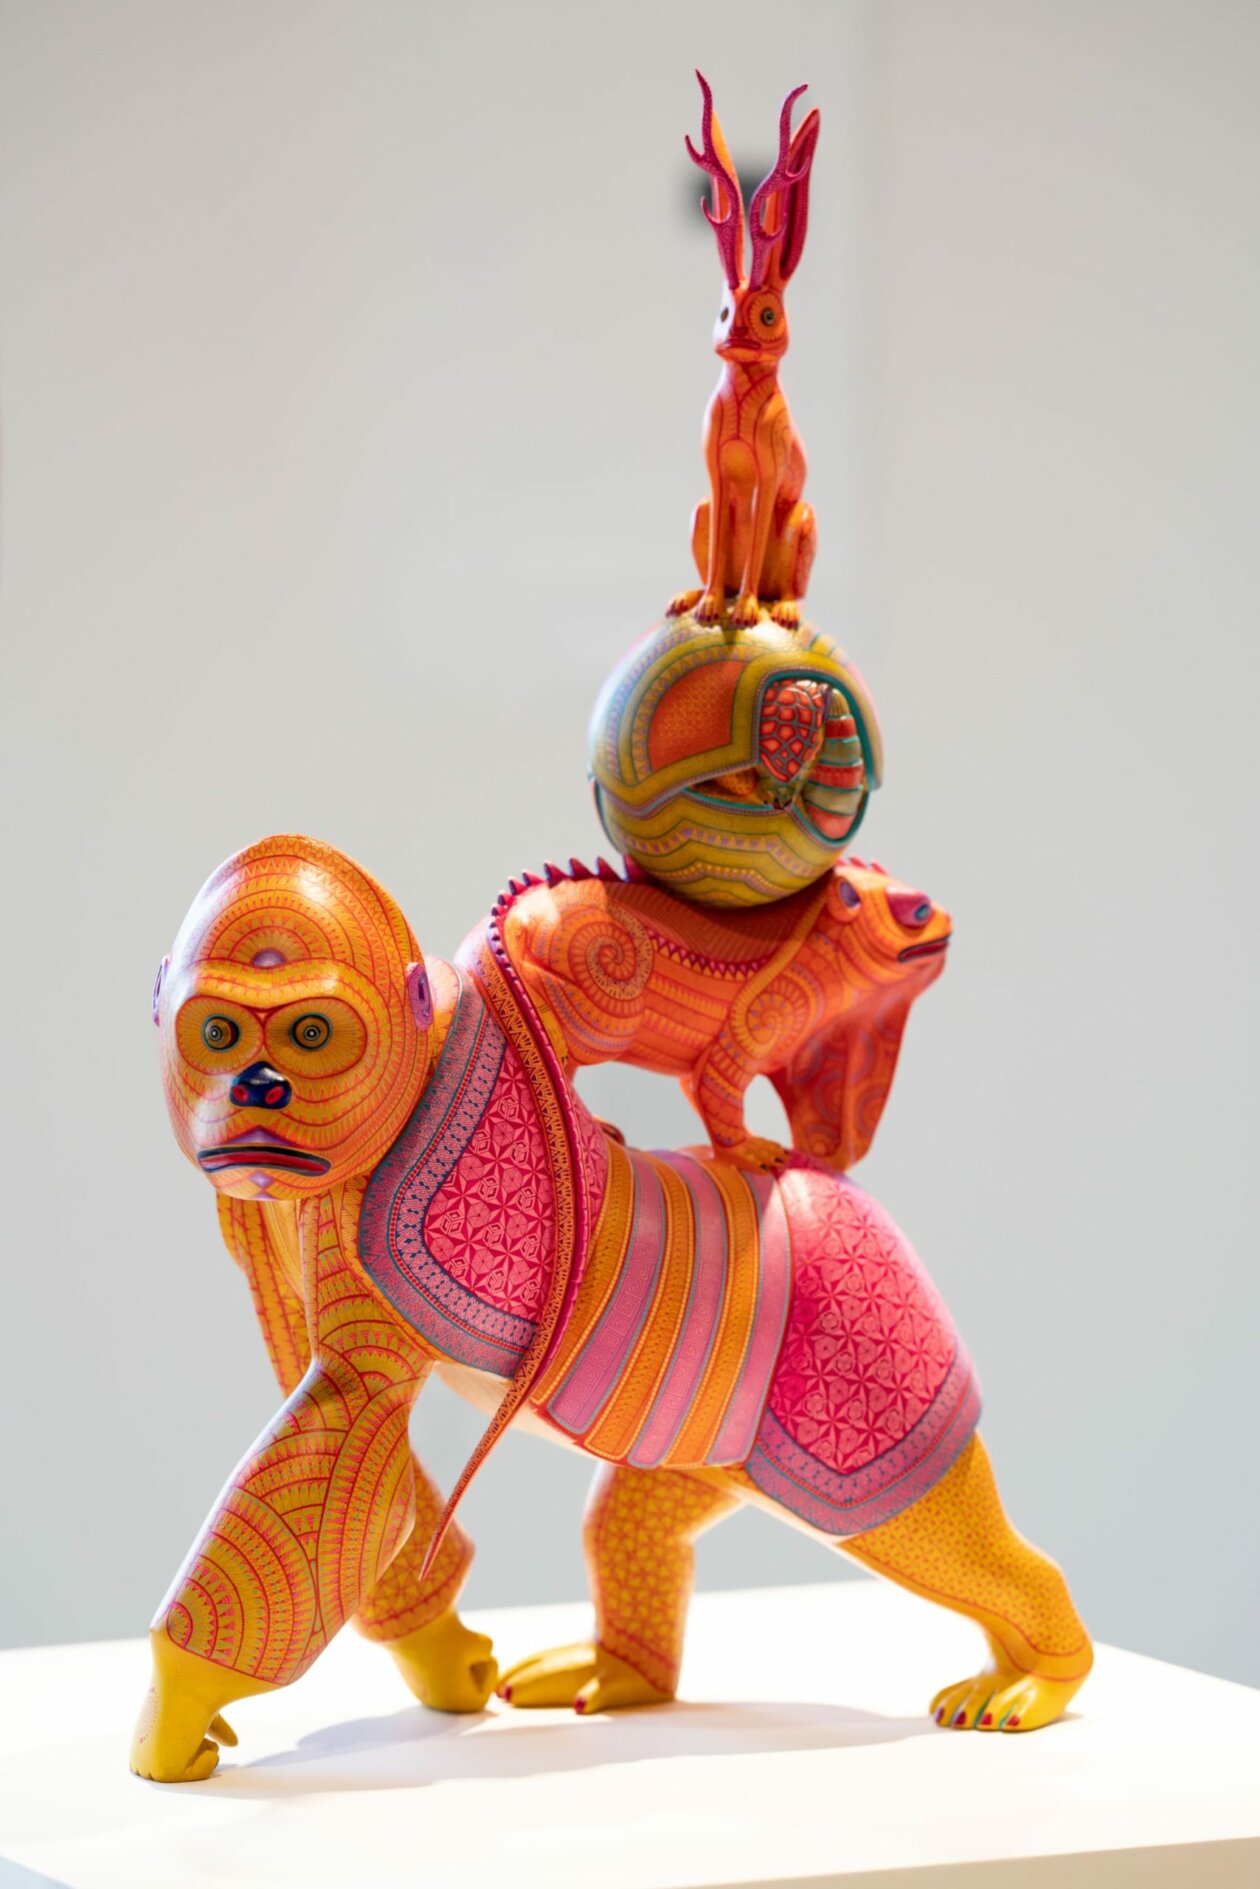 Multicolored Hand Carved Sculptures Inspired By Mexican Folk Art By Jacobo And Maria Angeles (11)